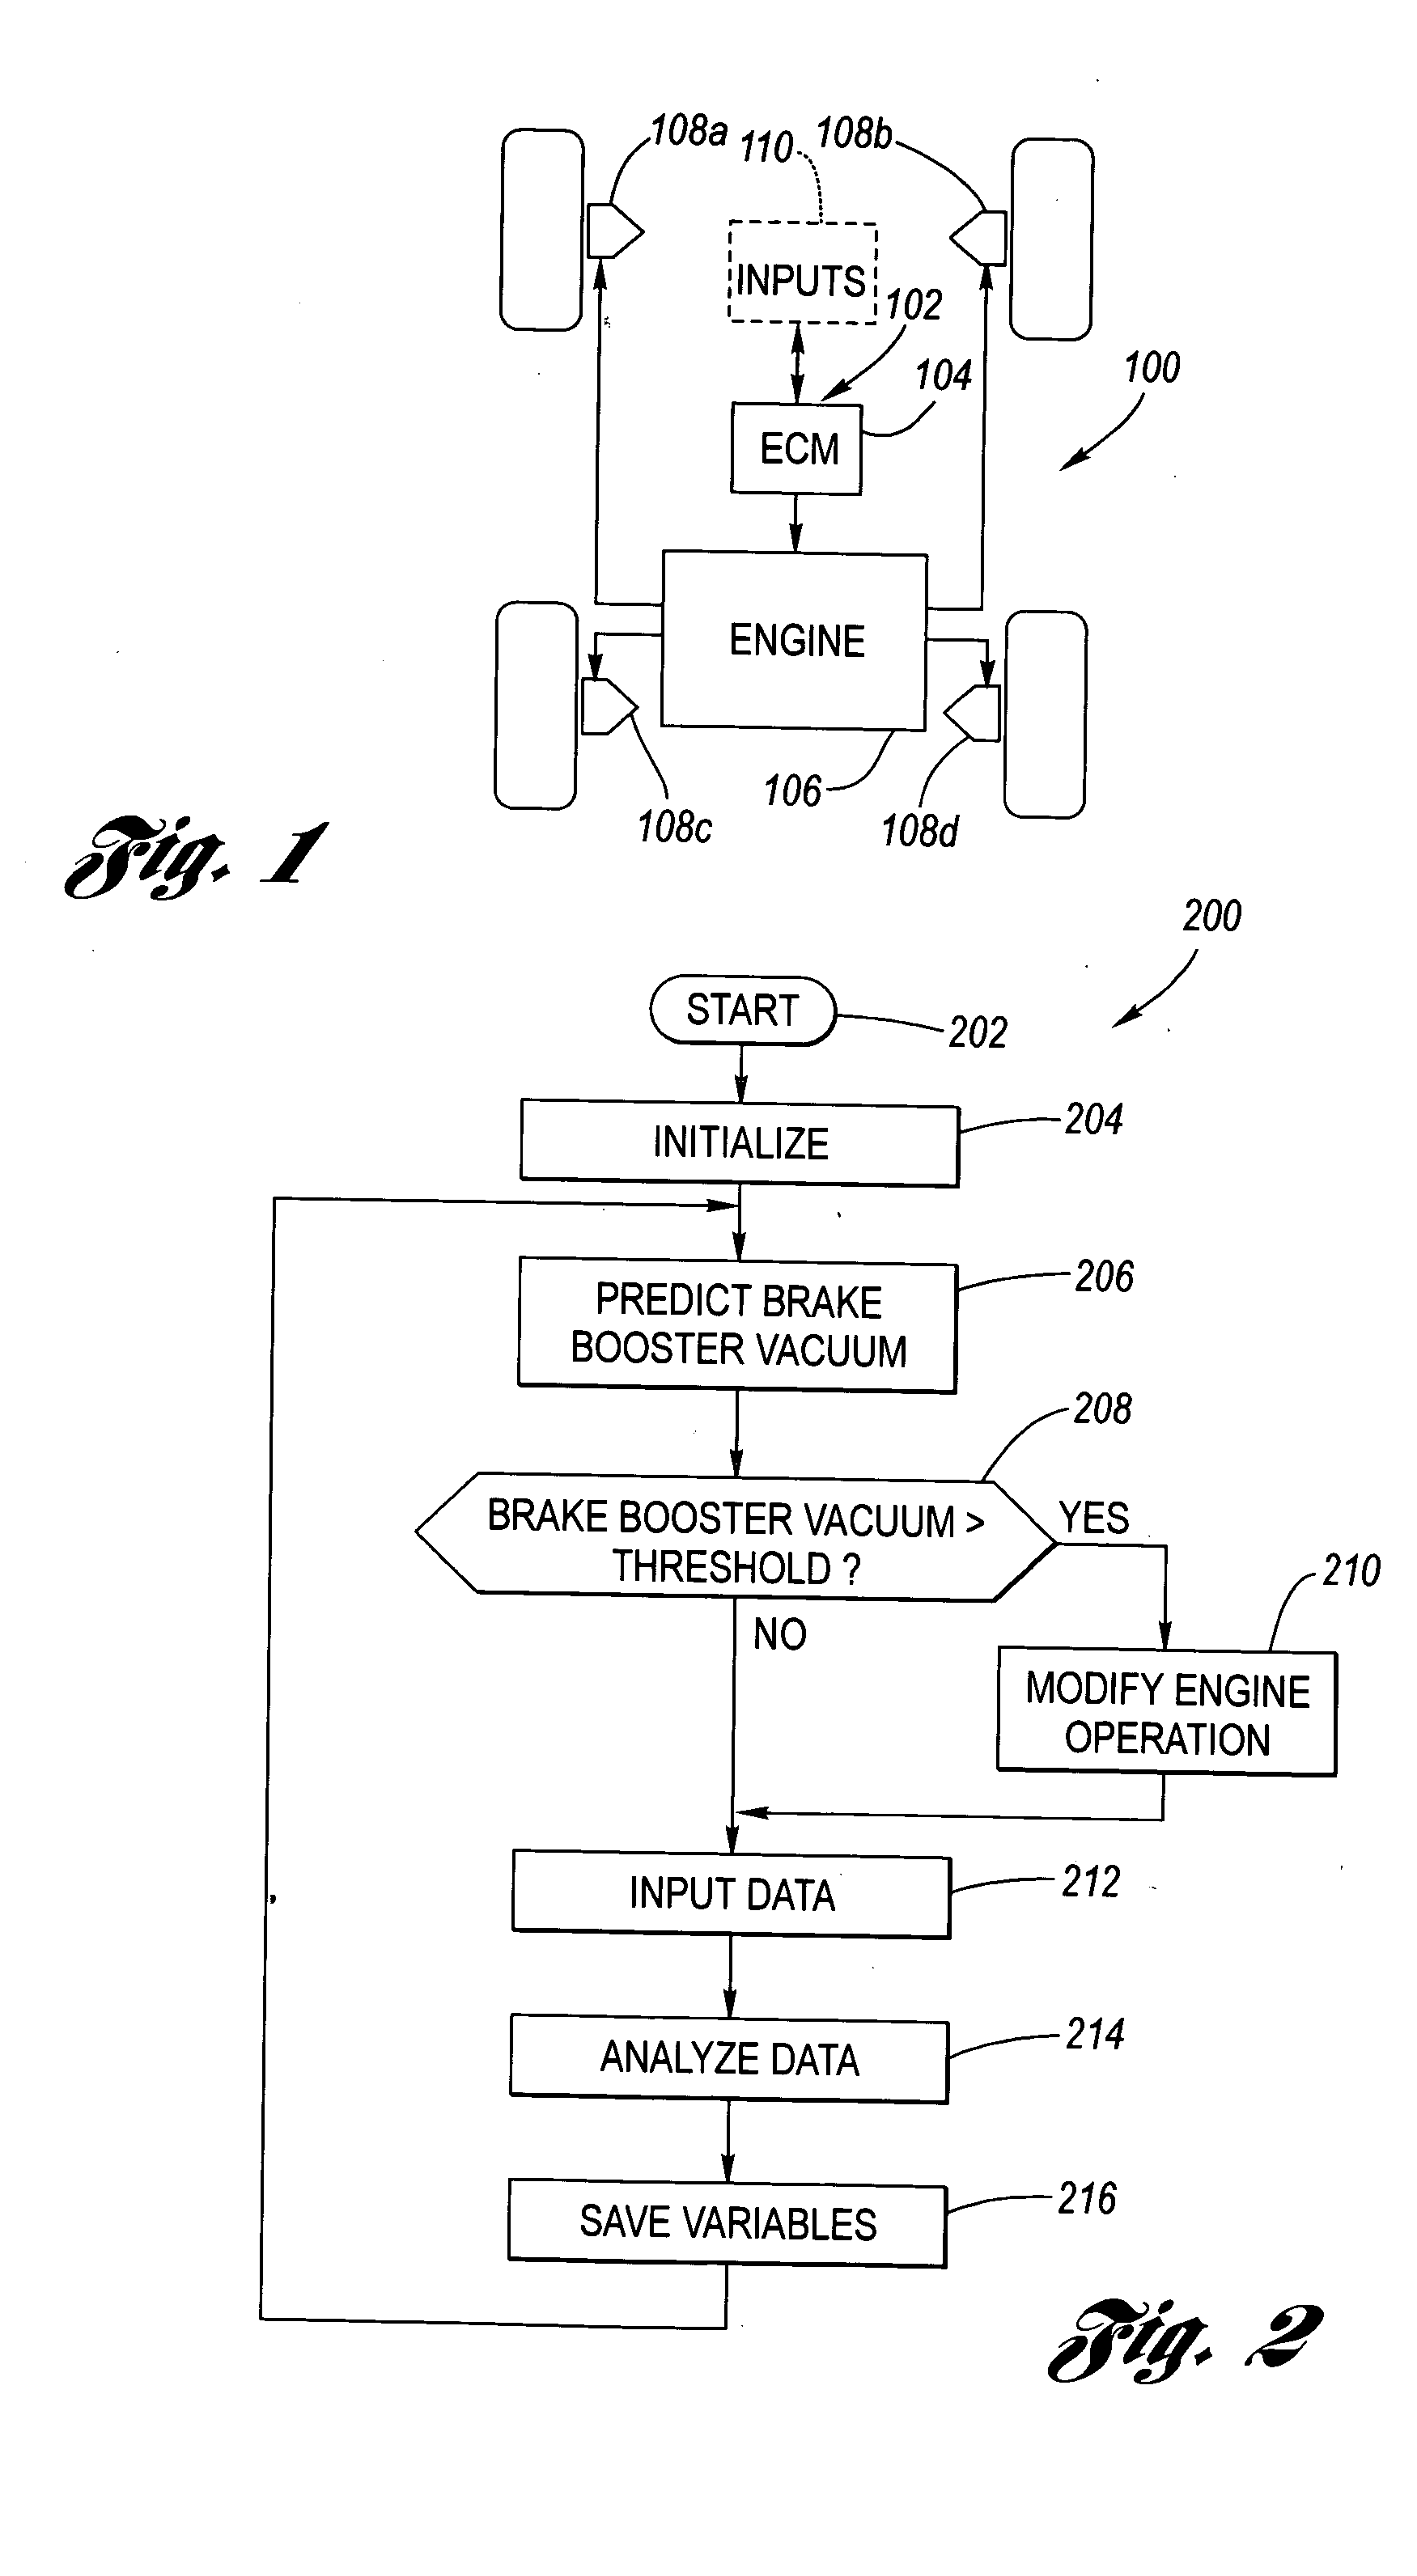 Brake booster vacuum prediction algorithm and method of use therefor